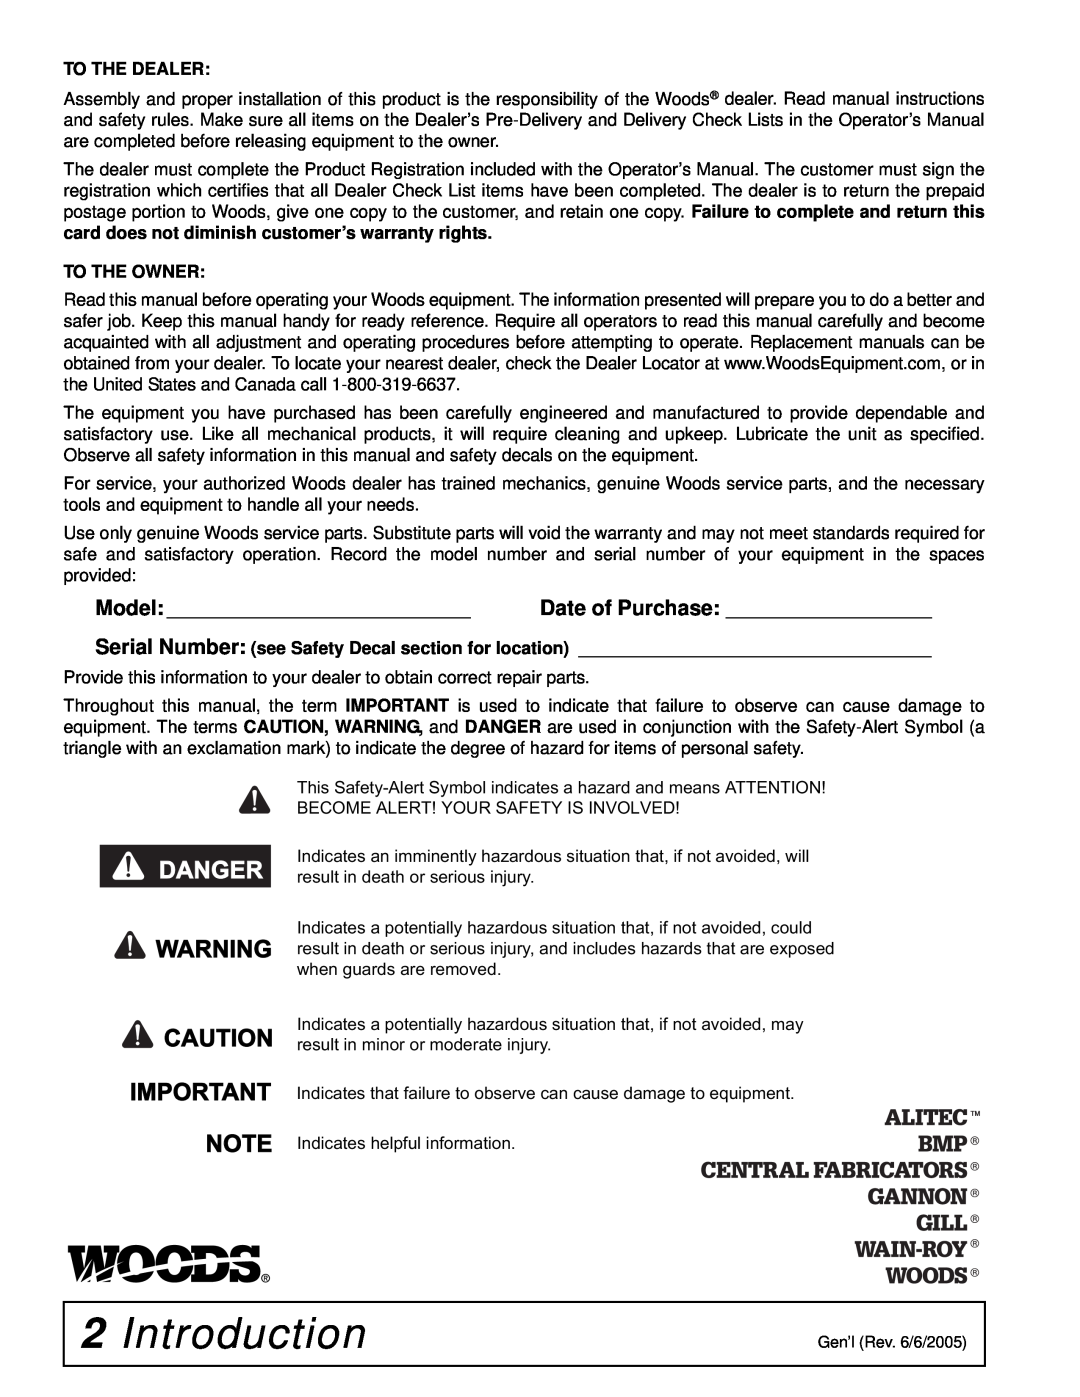 Woods Equipment RD60, RDC54, RD72 manual Introduction, Danger, Important Note 